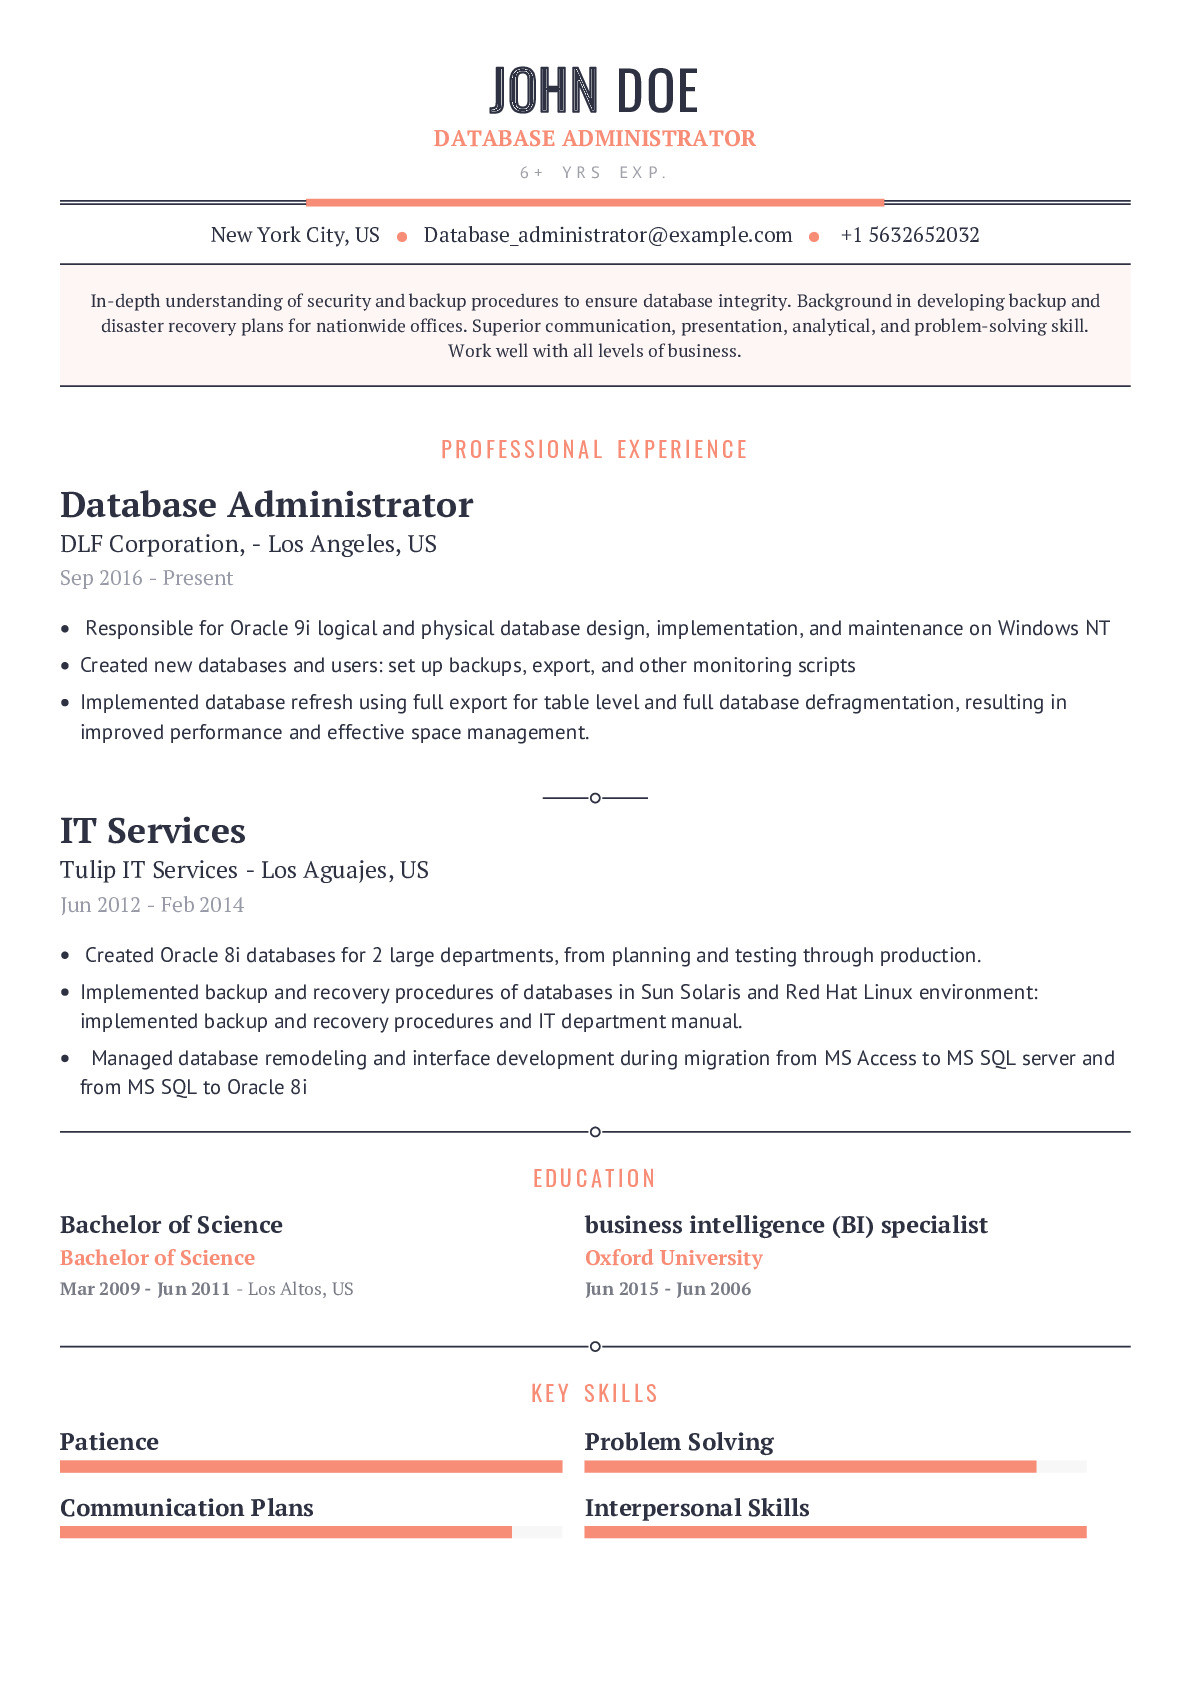 Oracle Dba One Year Experience Resume Sample Database Administrator Resume Example with Content Sample Craftmycv